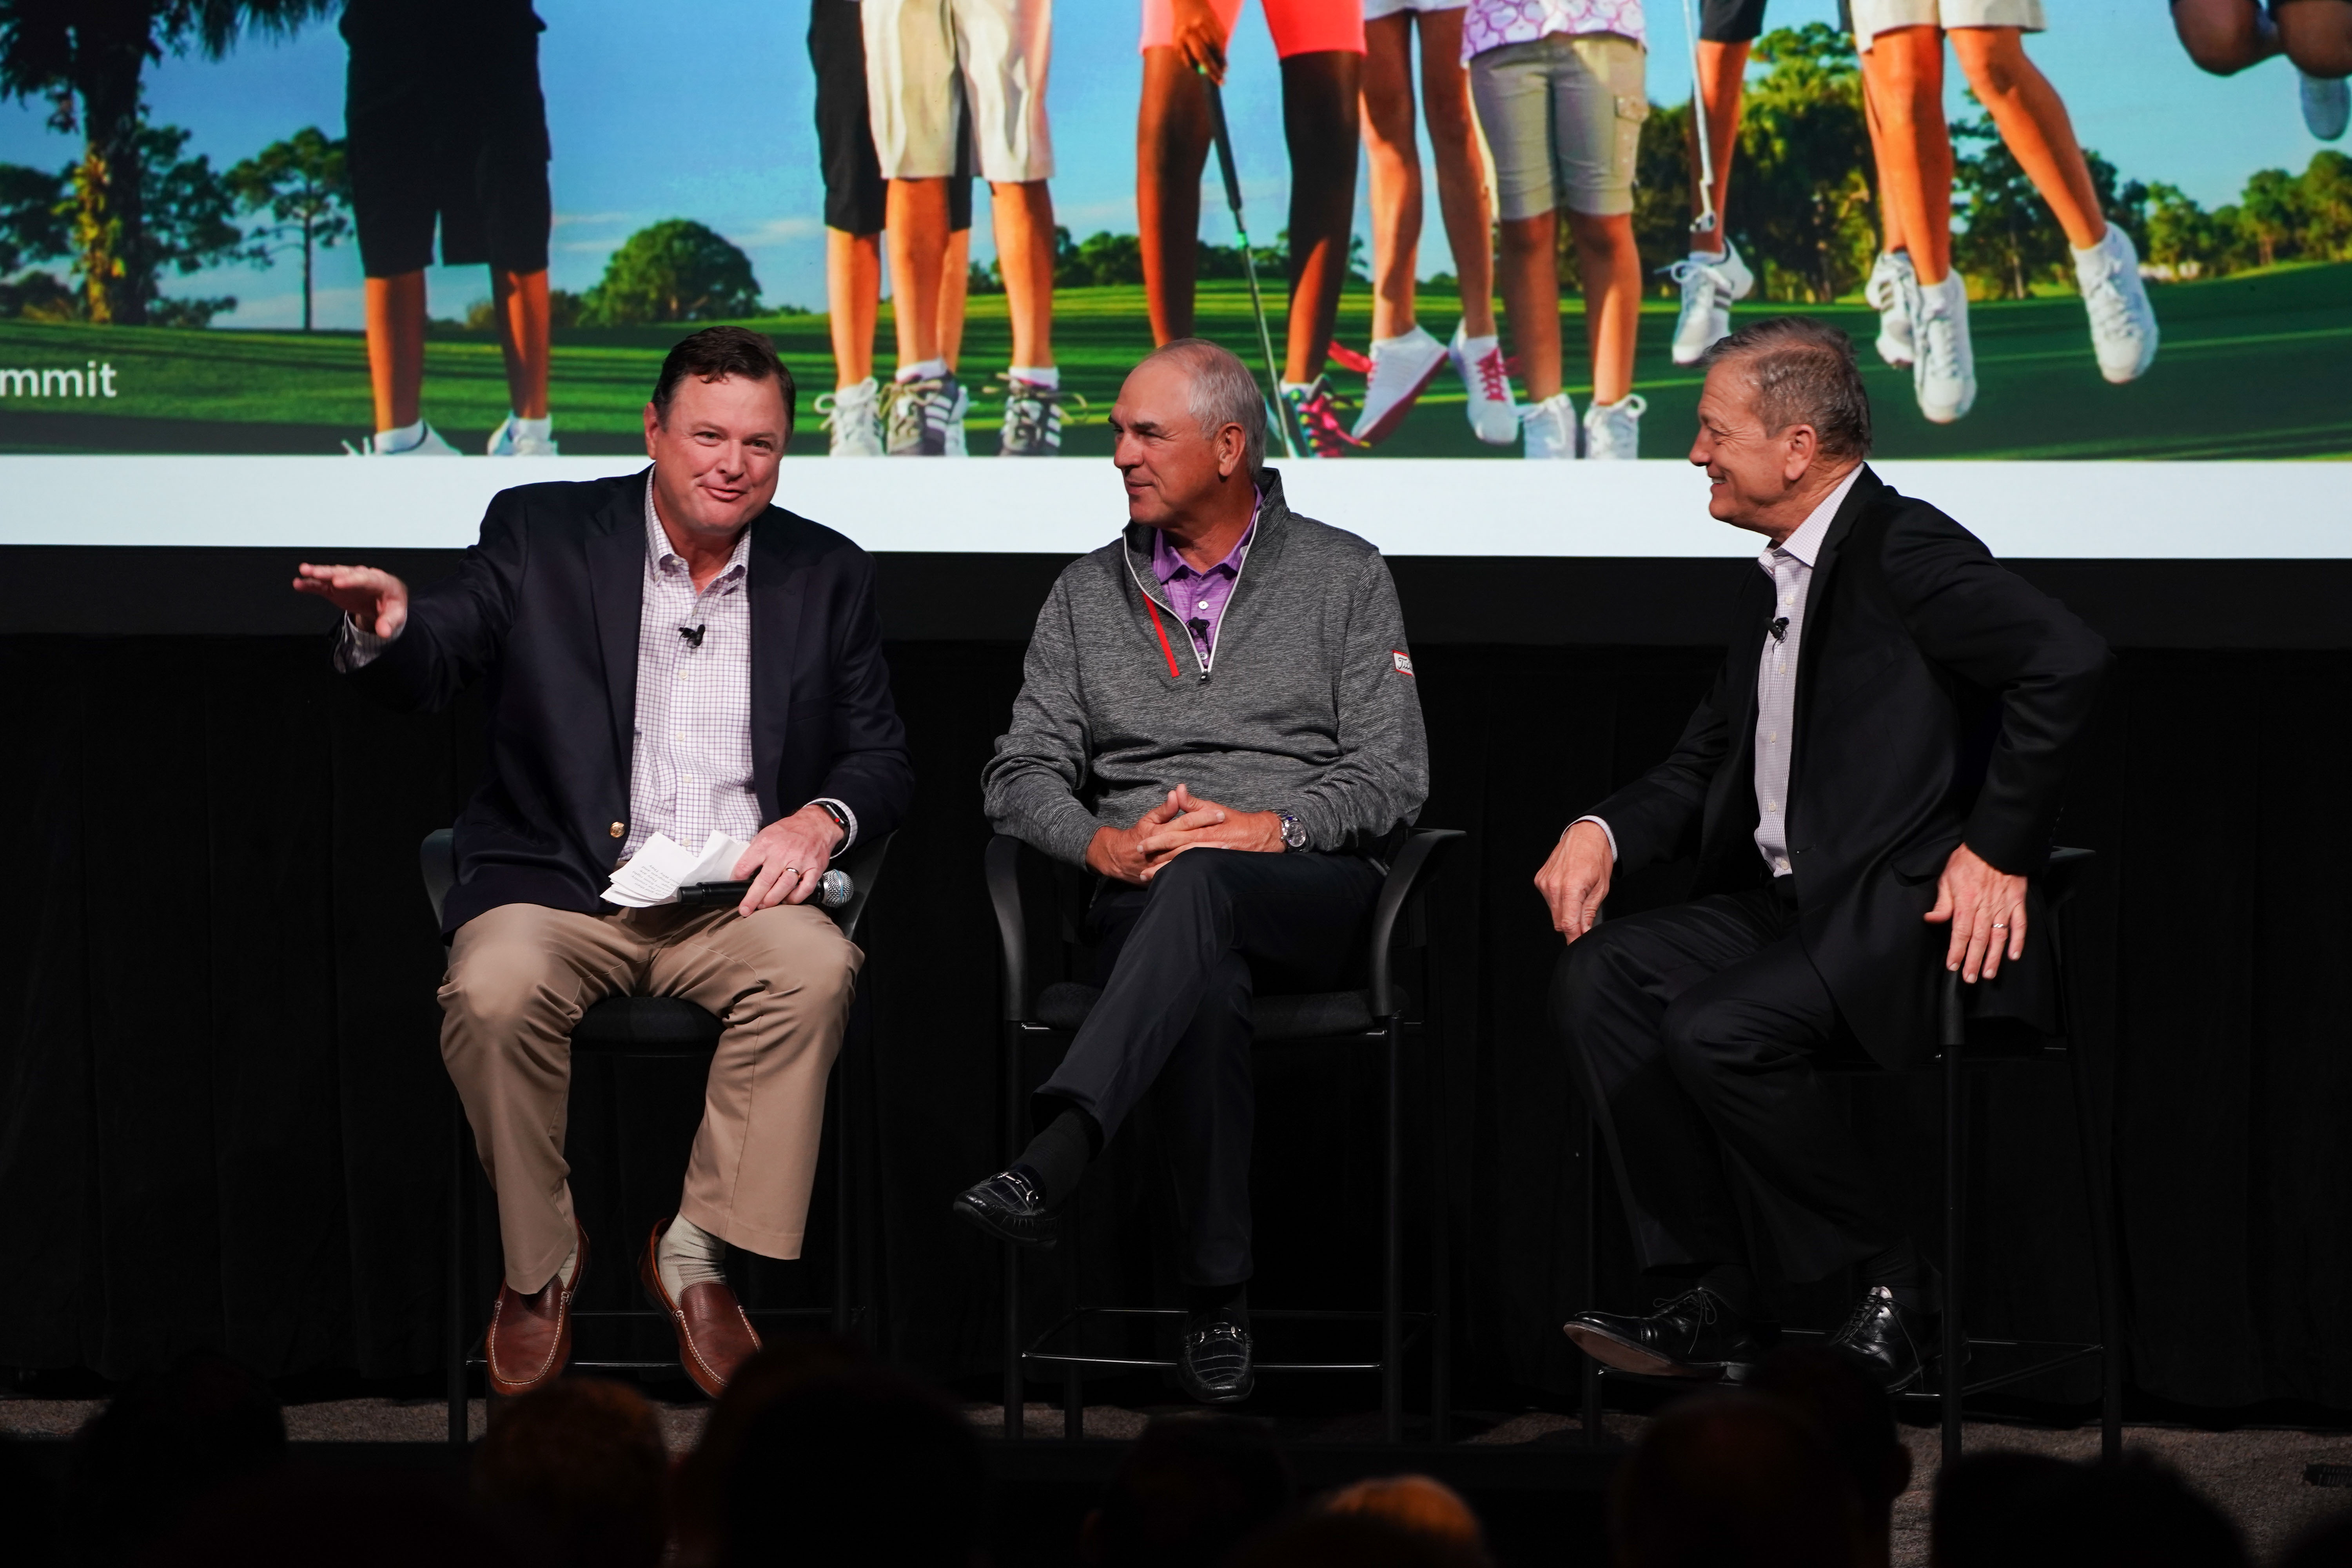 Worldwide experts headline Day 1 of PGA Global Youth and Family Summit 